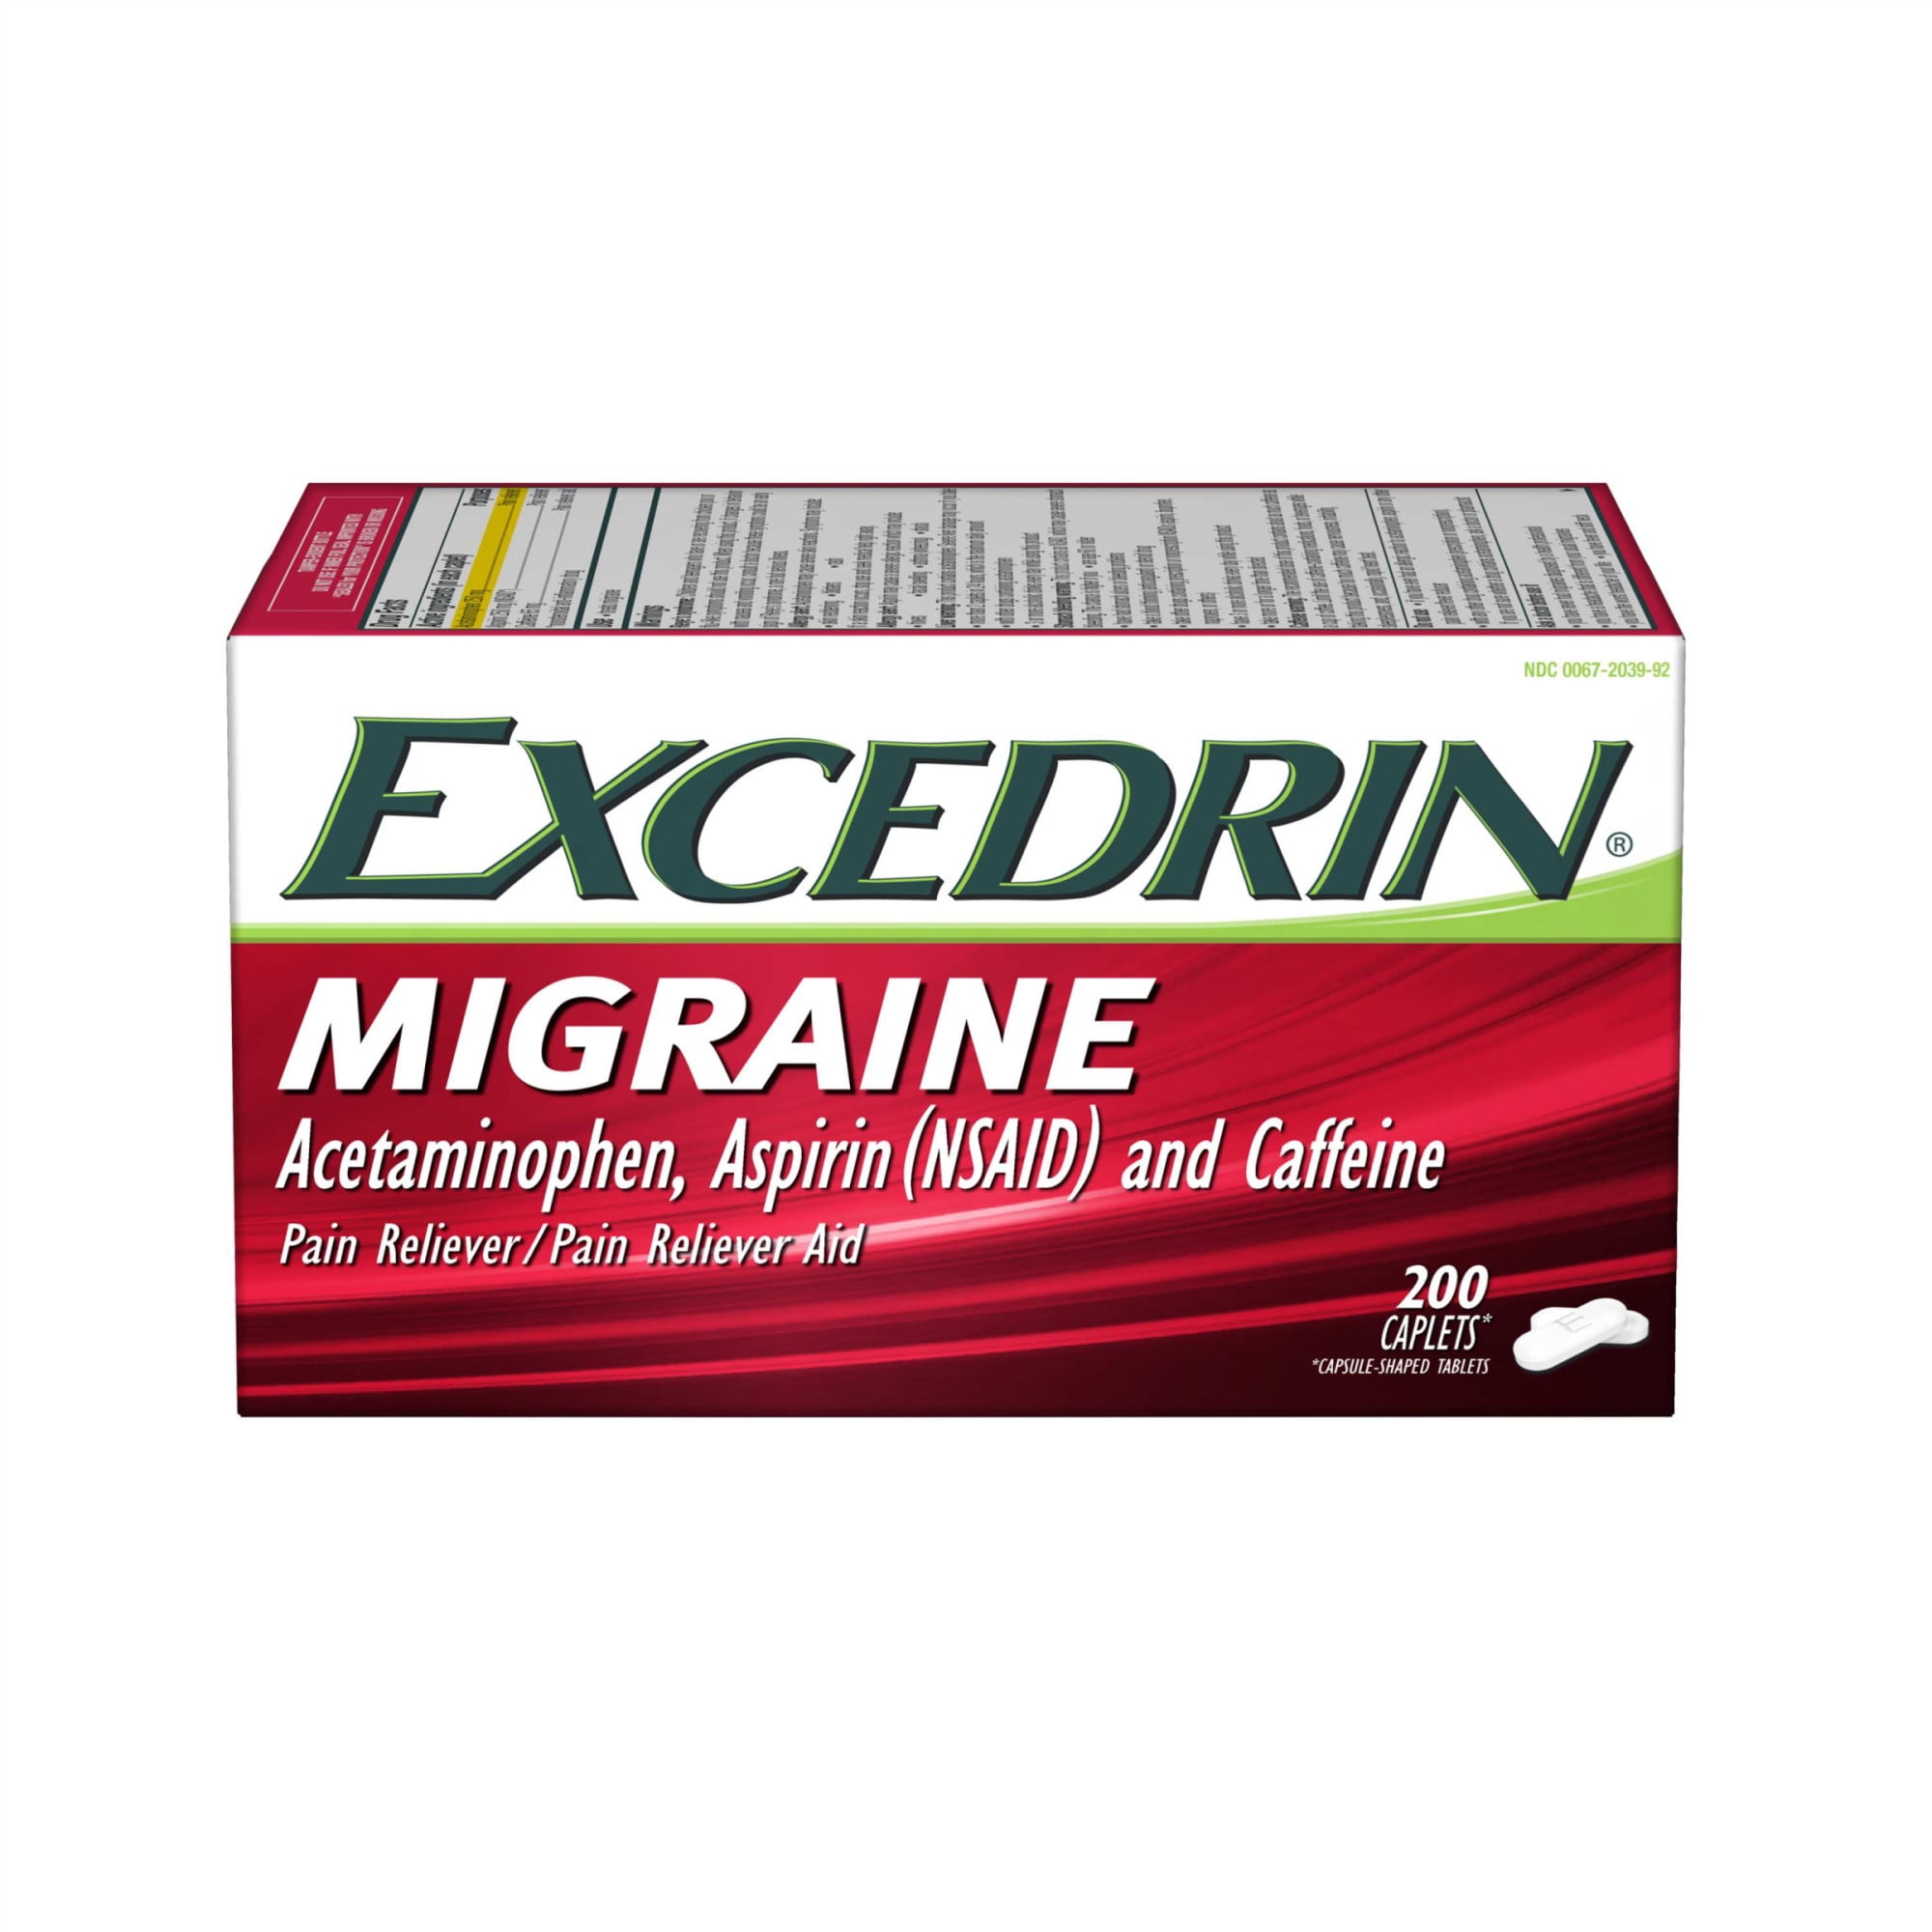 Migraine Sufferers Alert: Two Popular Excedrin Products